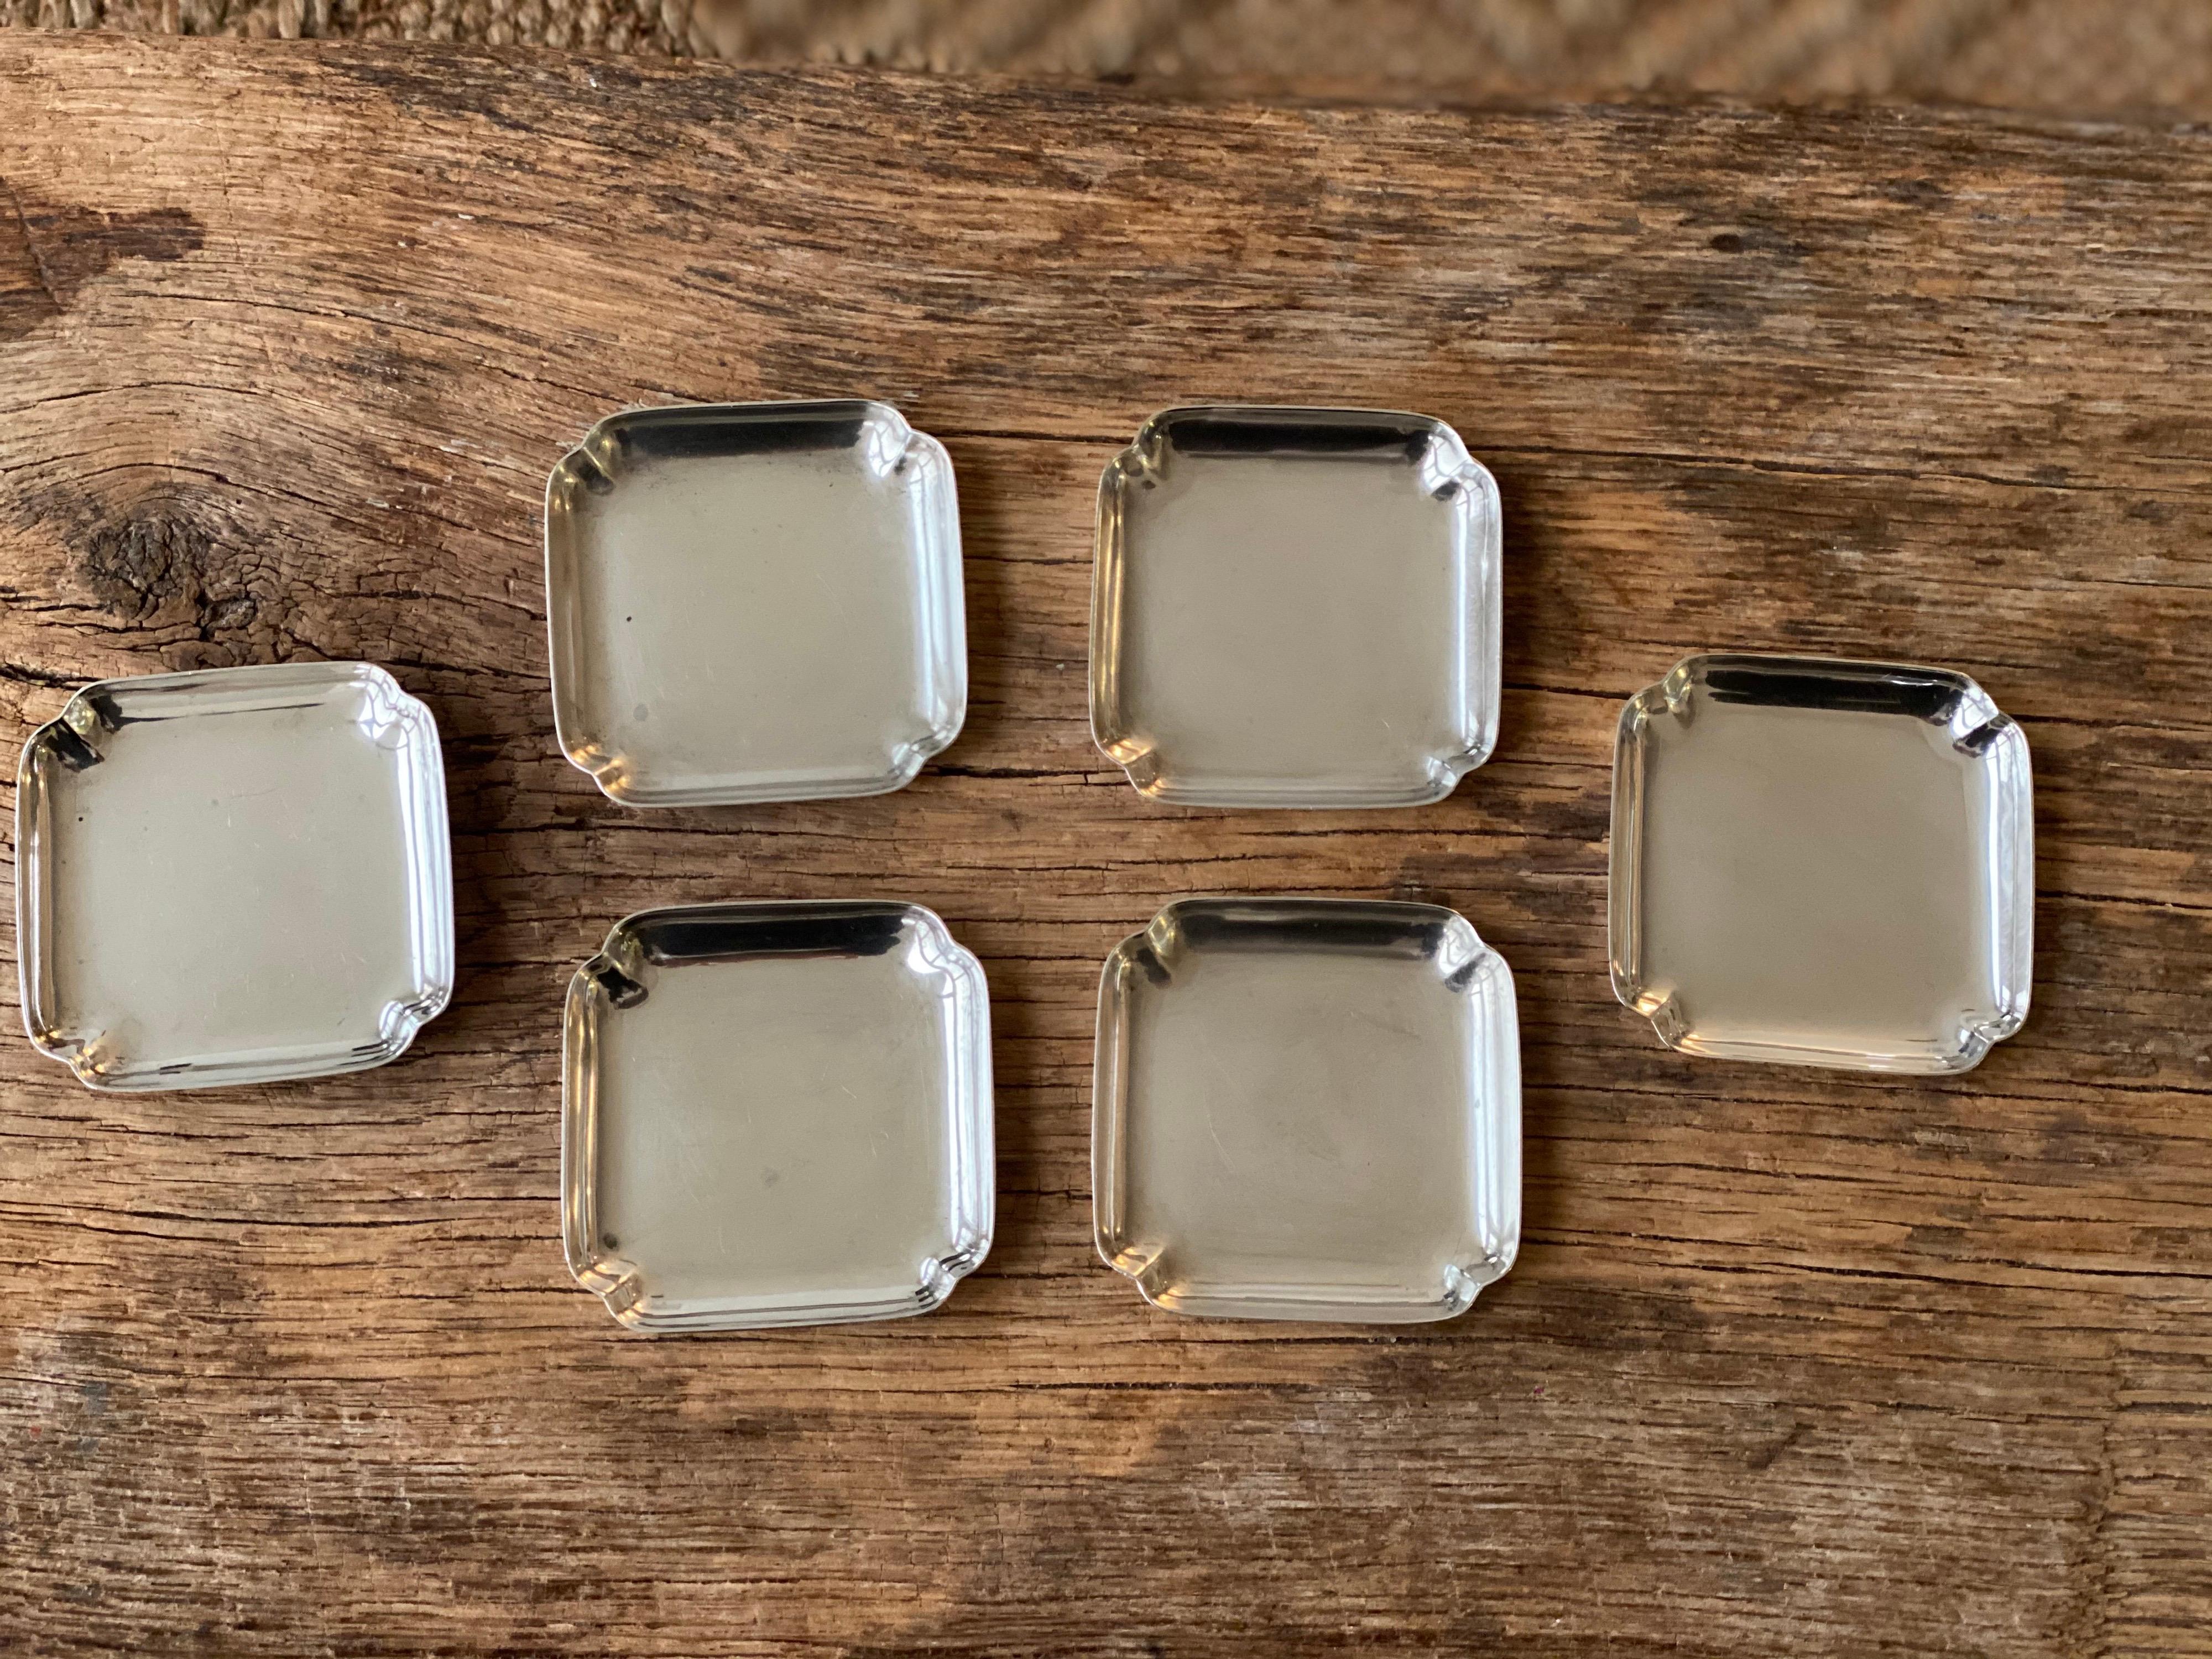 Cartier sterling silver nut plates

All six stamped 